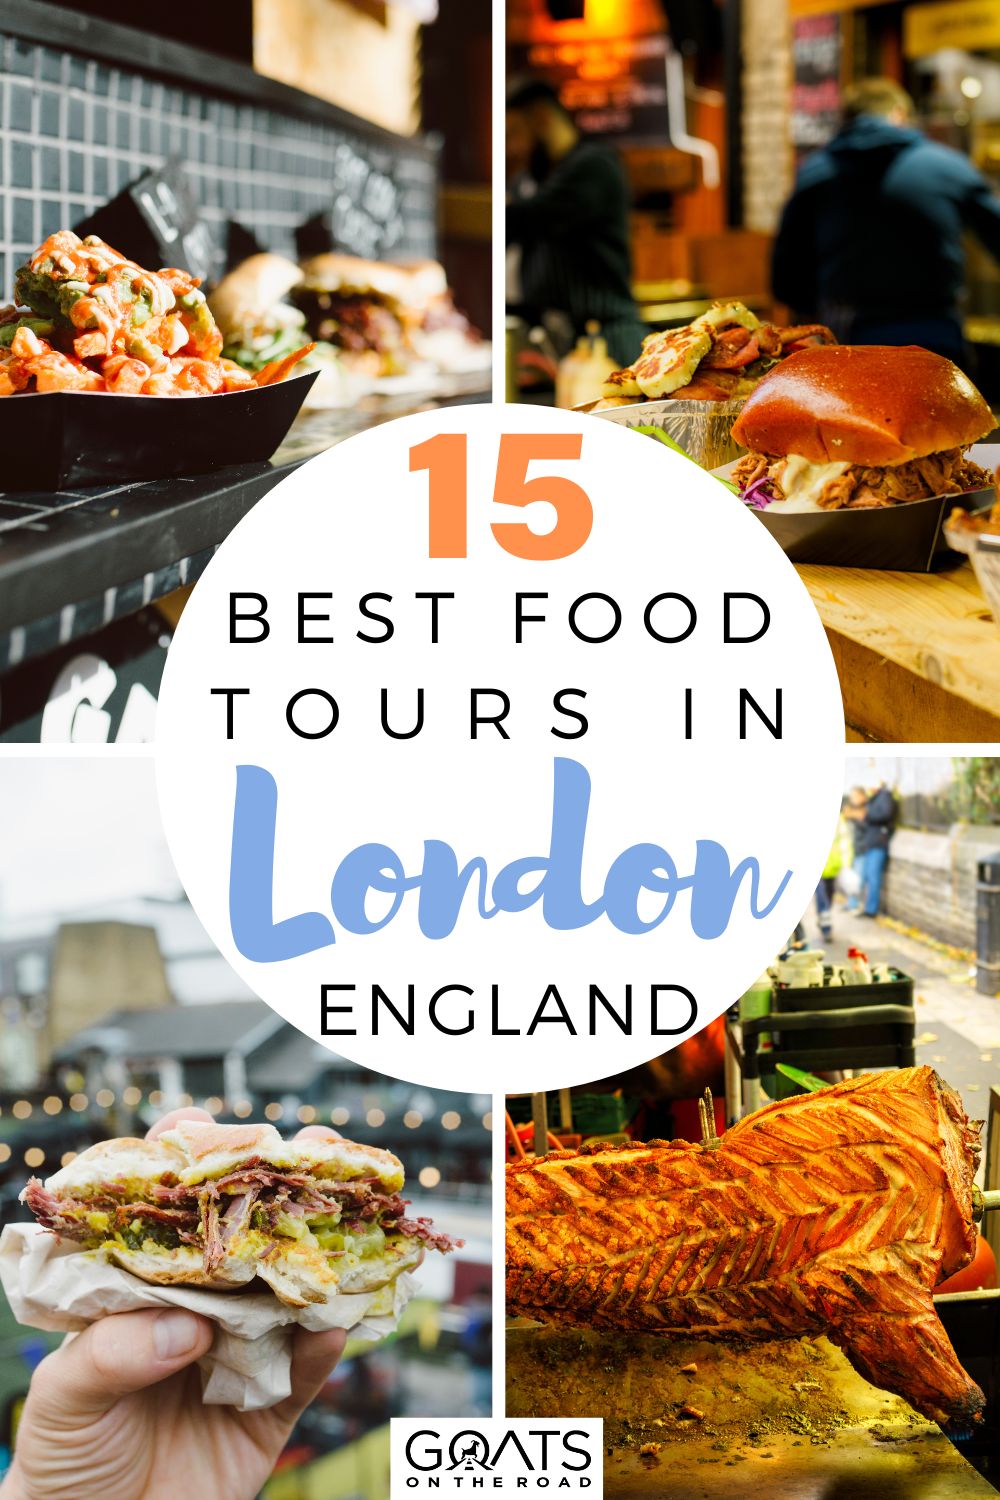 15 Best Food Tours in London, England